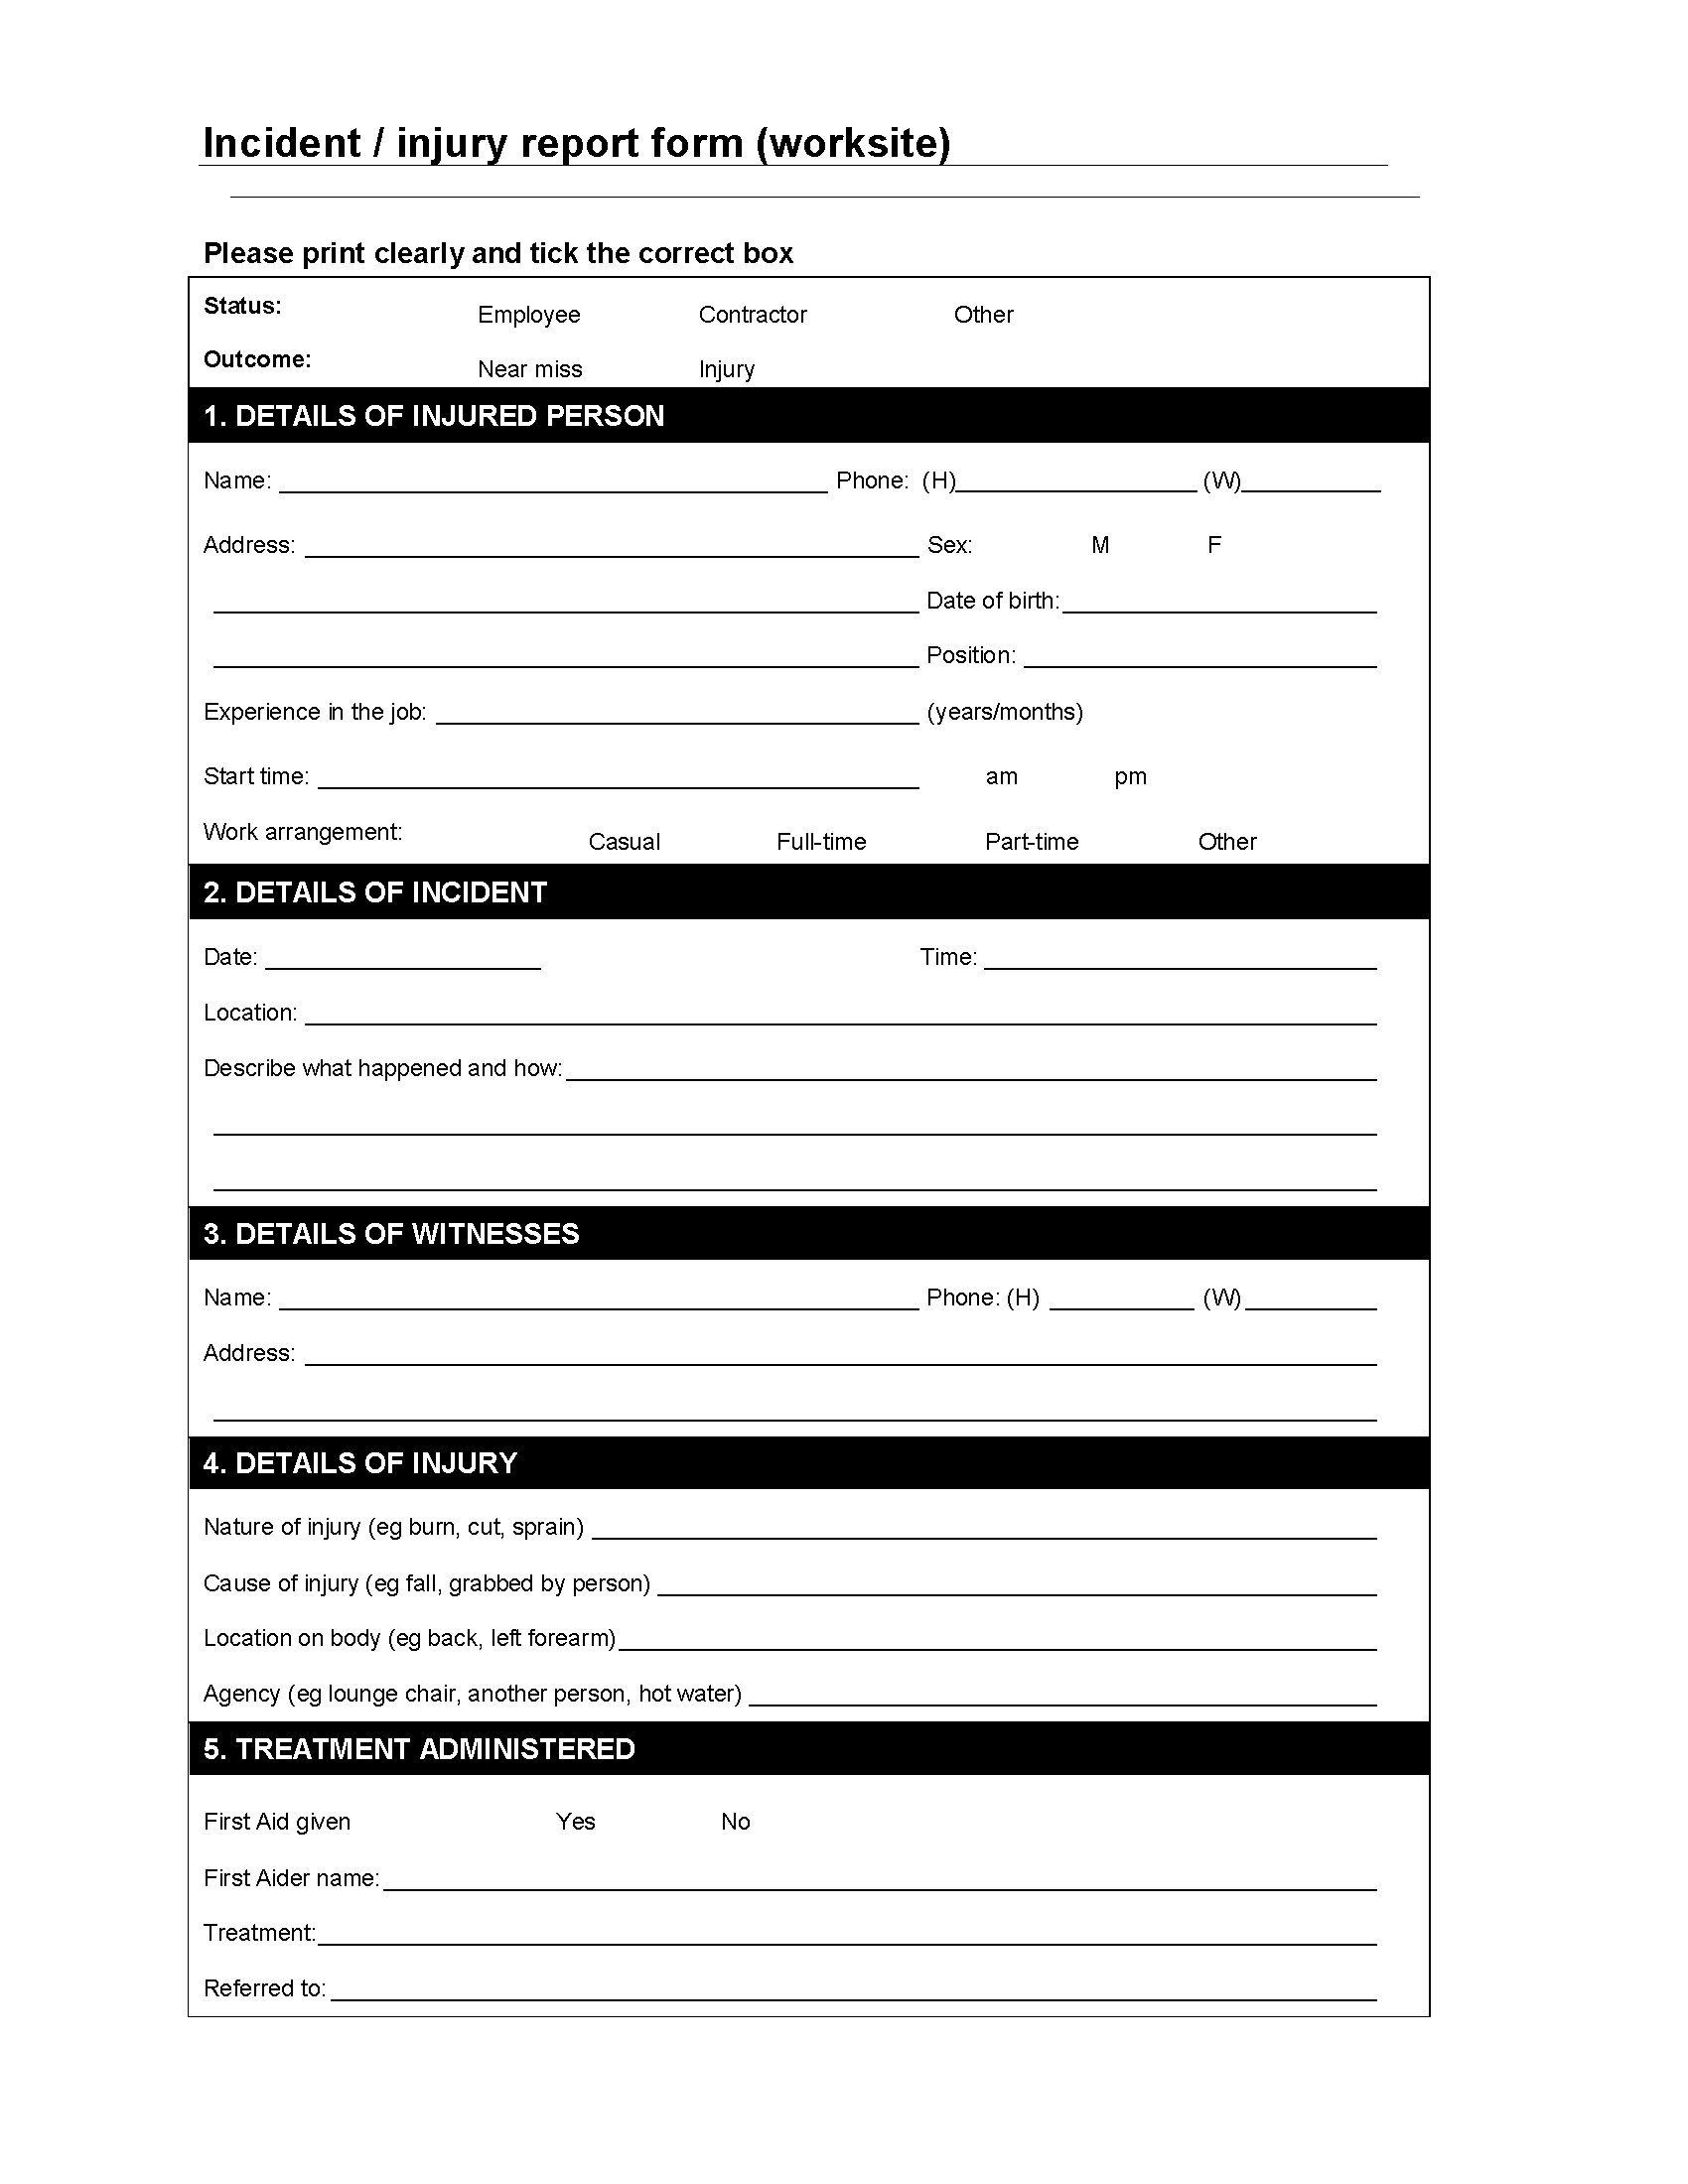 Worksite Incident / Injury Report Form | Legal Forms And Pertaining To Injury Report Form Template